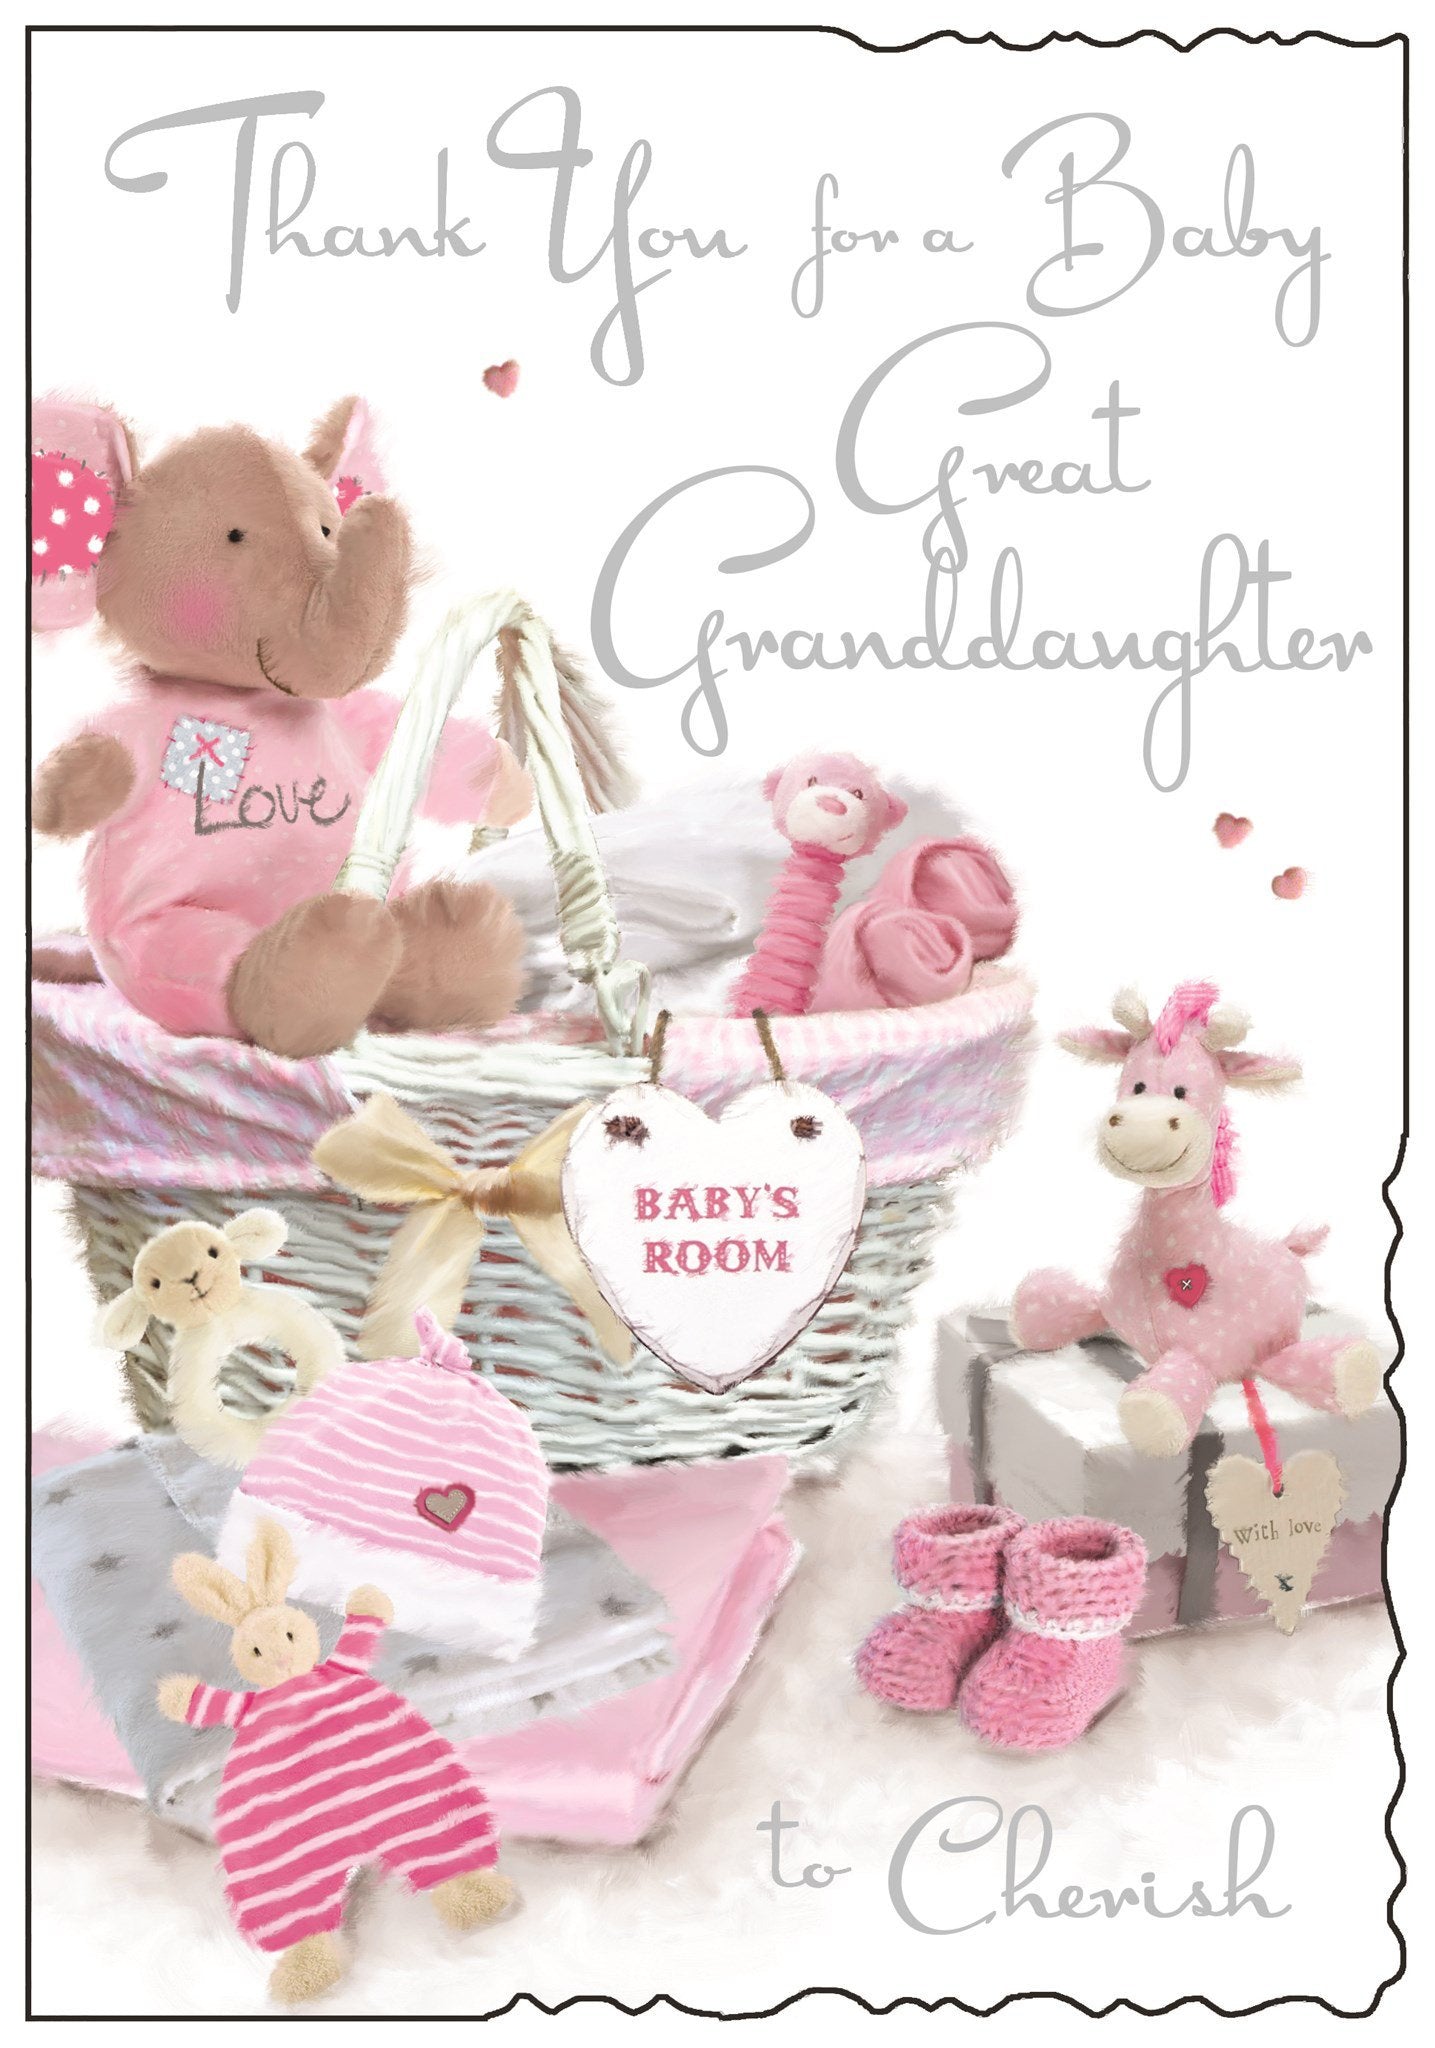 Front of Thank You for a Great Granddaughter Greetings Card